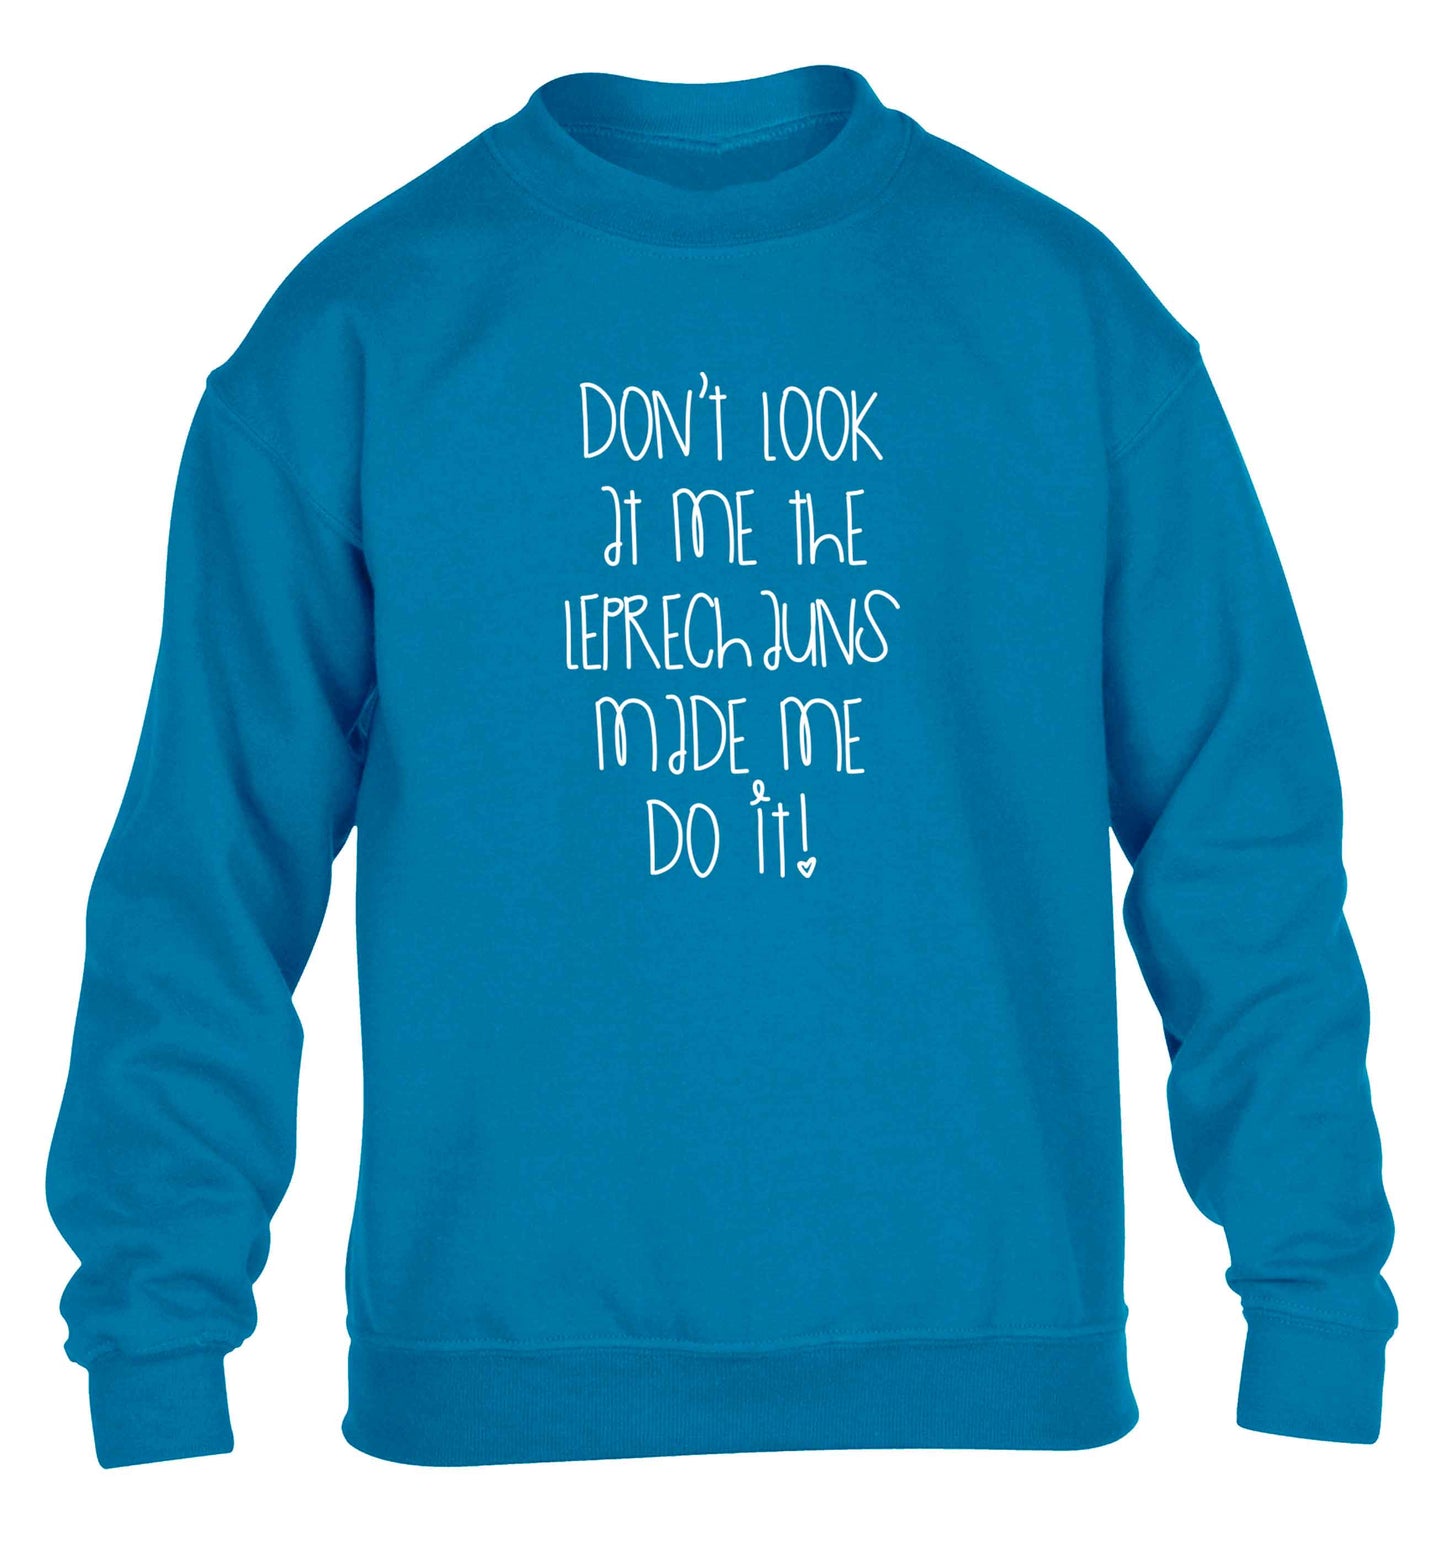 Don't look at me the leprechauns made me do it children's blue sweater 12-13 Years